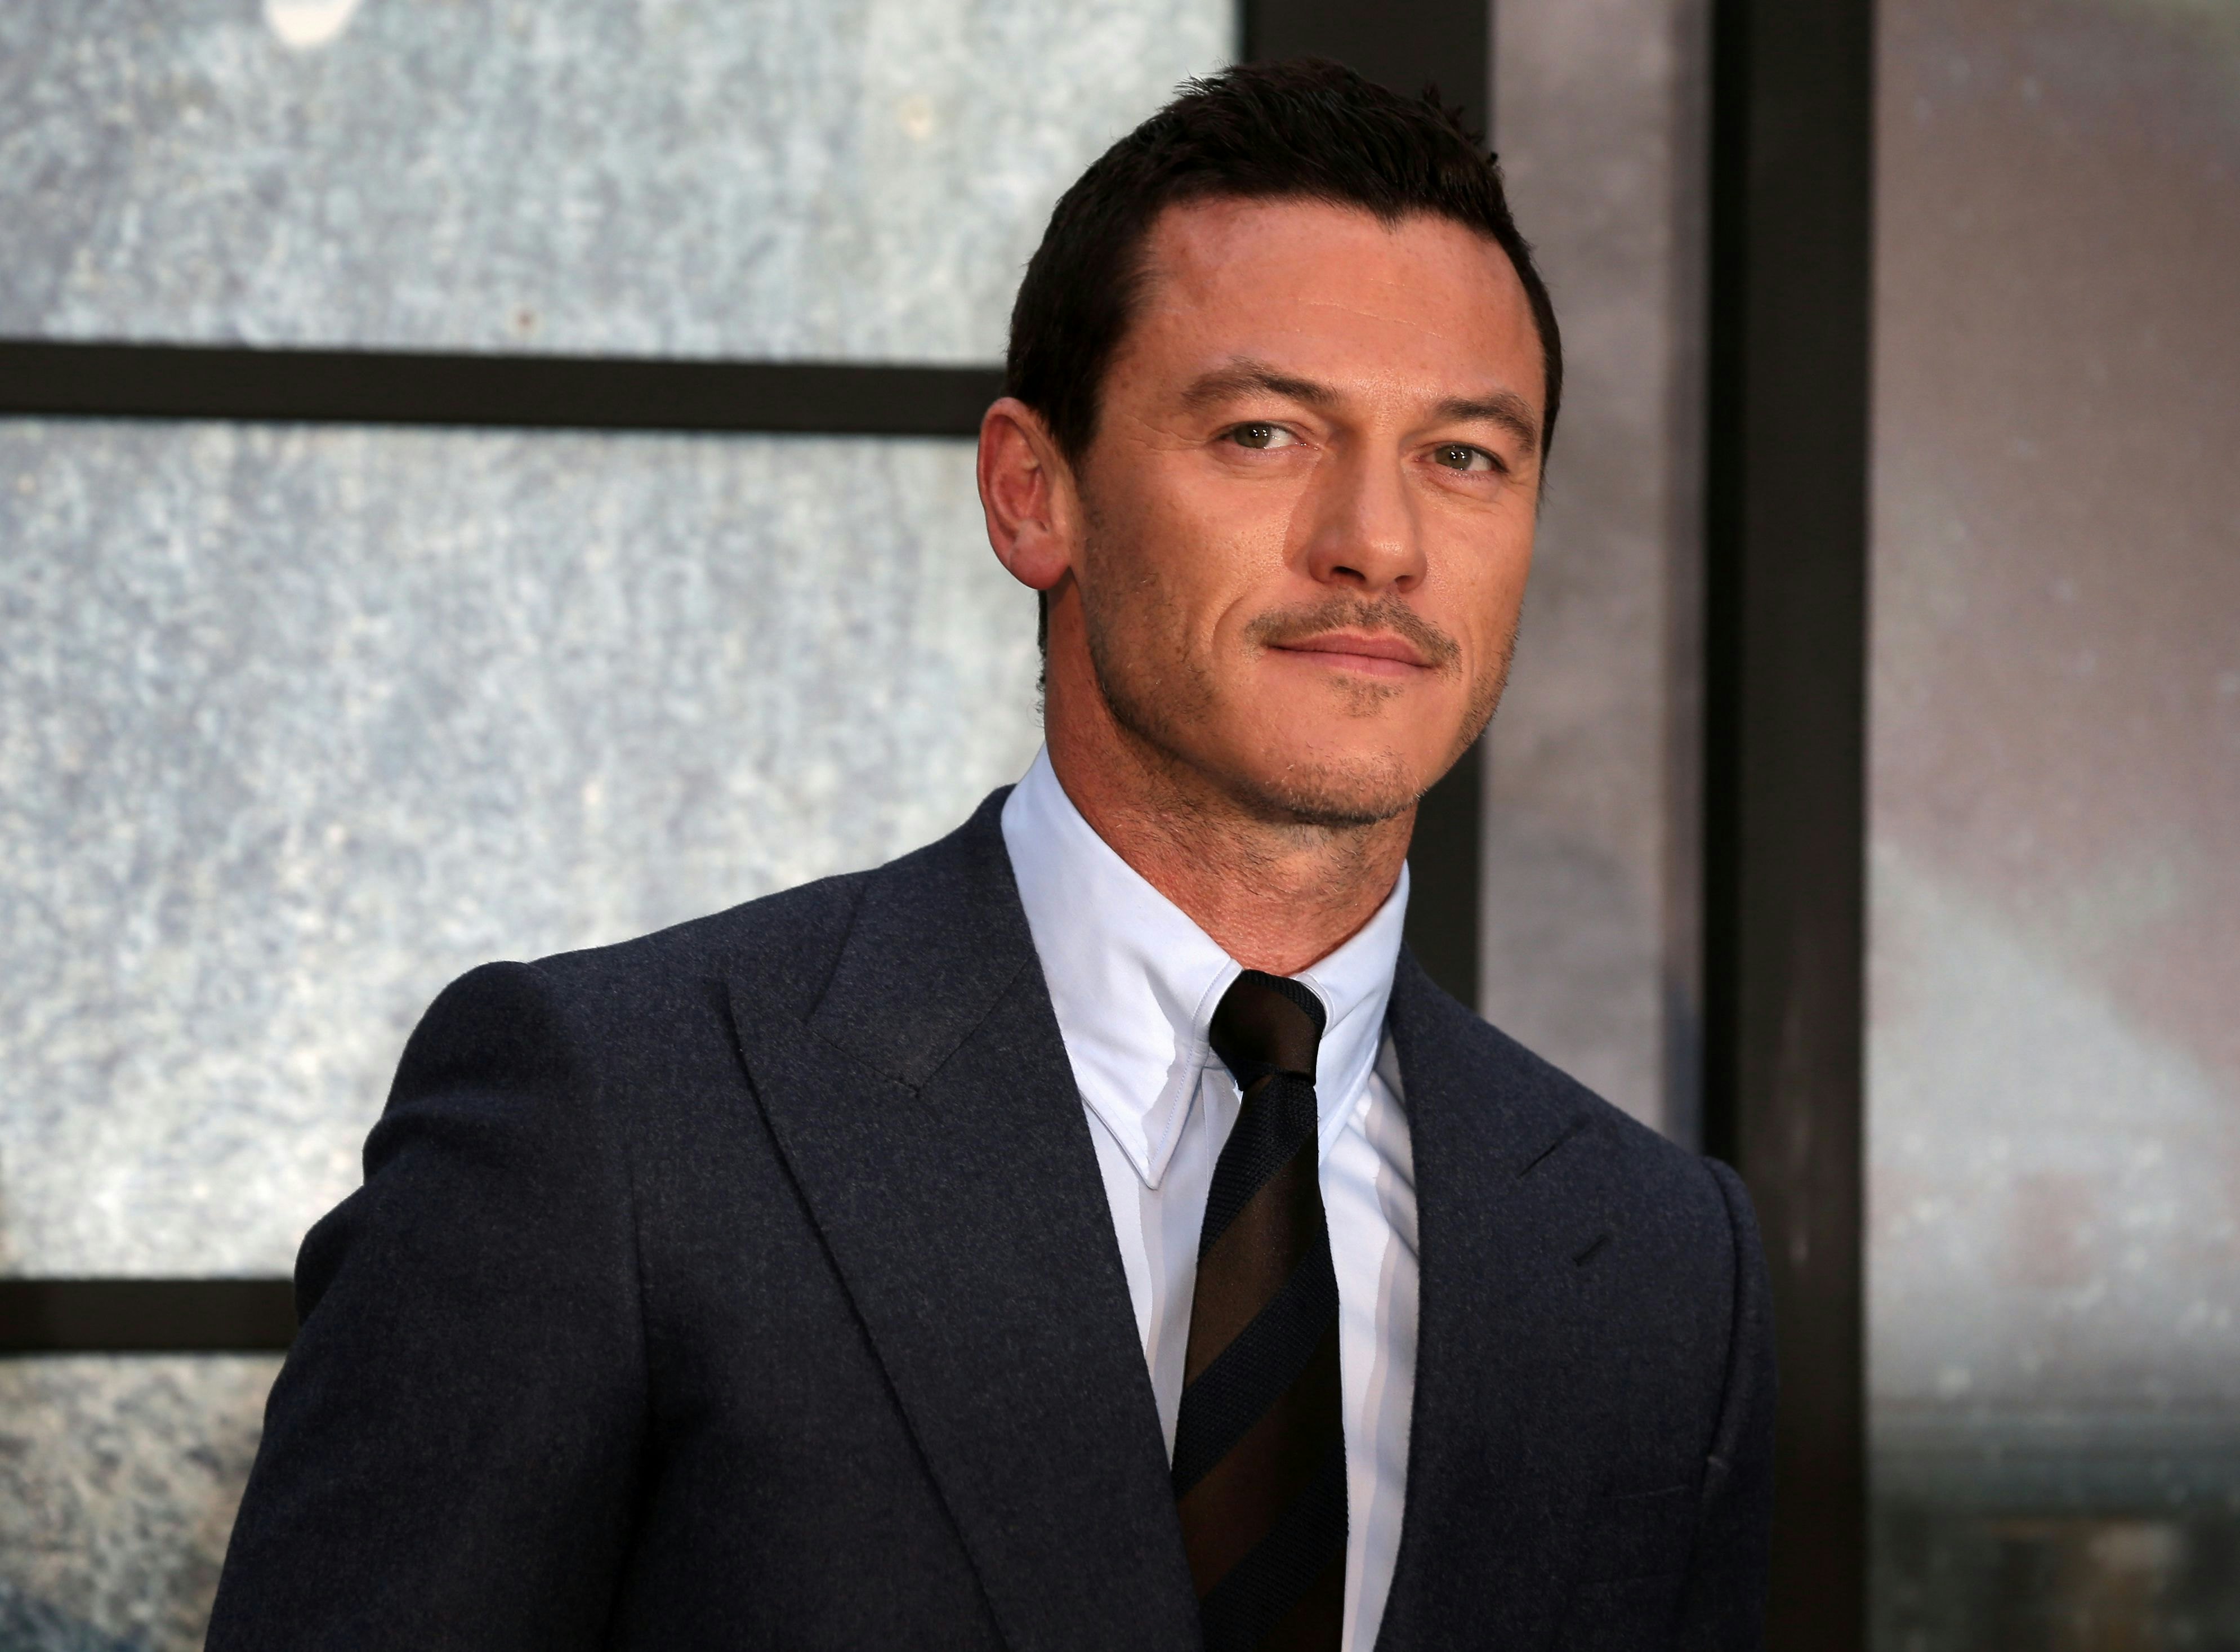 Who Plays Gaston In Beauty And The Beast 2017 Luke Evans